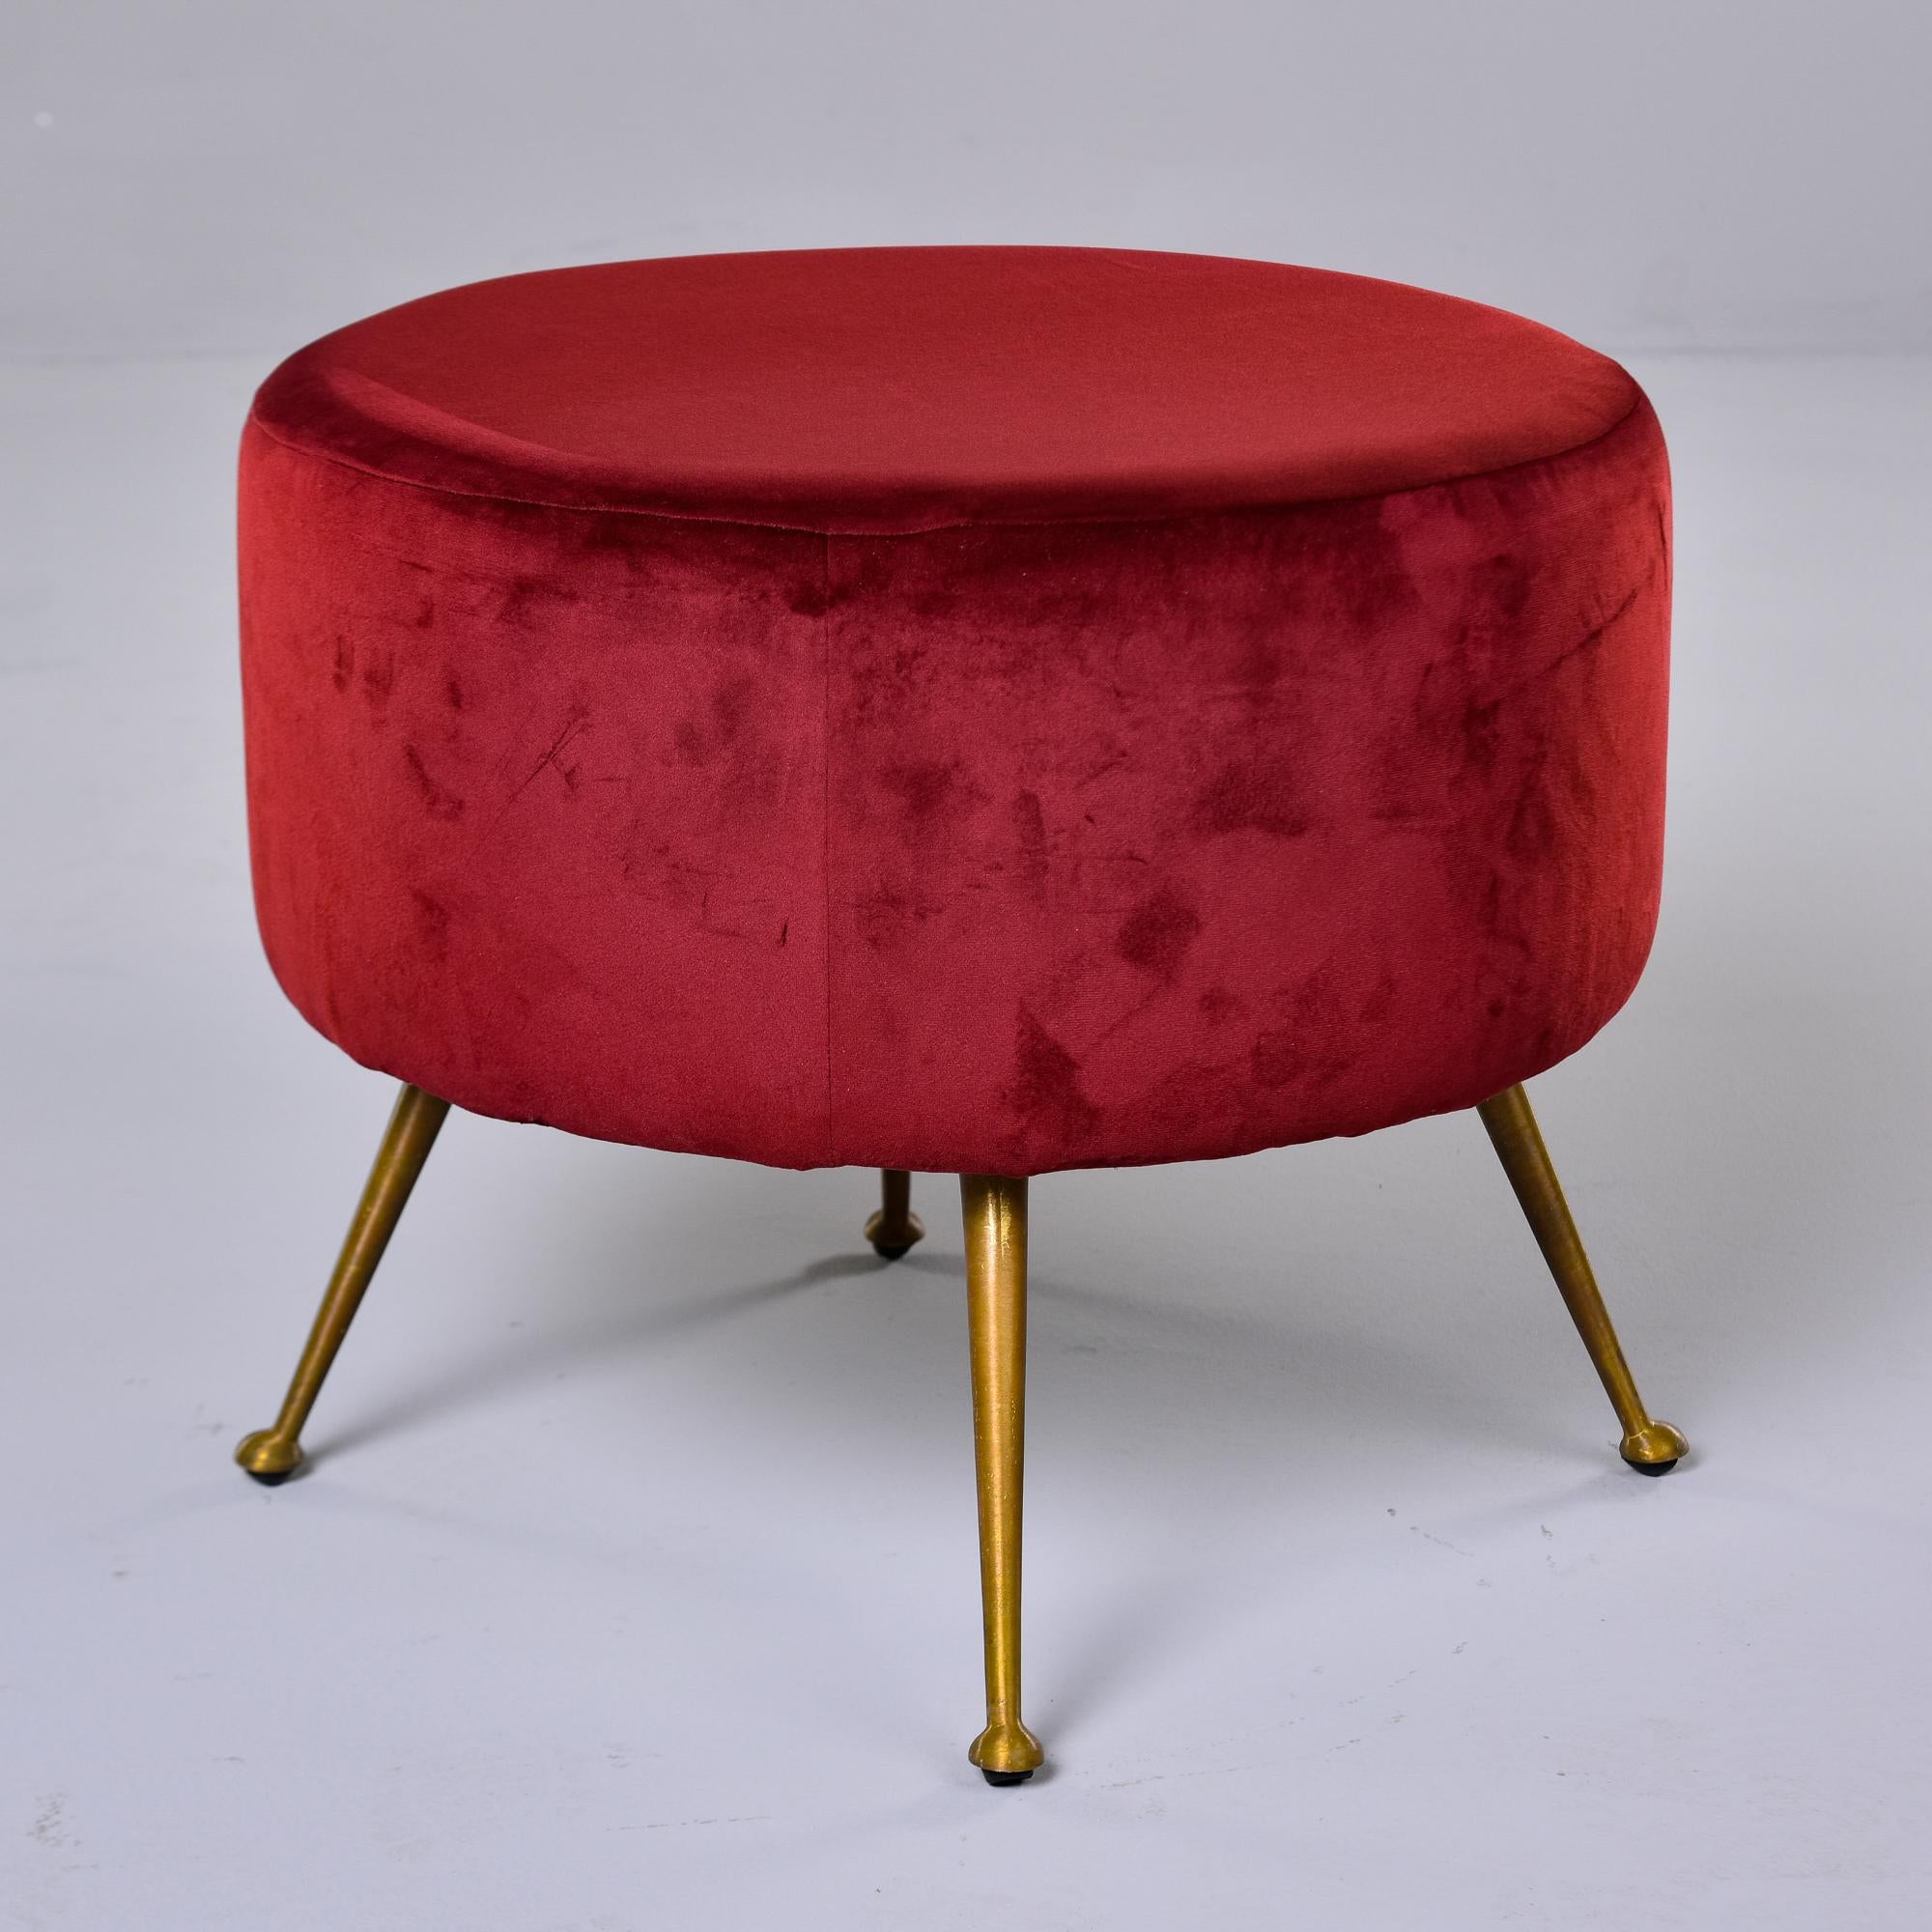 Found in Italy, this stool dates from the 1950s. Round seat with dark red upholstery and four slender, tapered brass legs with rounded feet. Unknown maker. Very good overall vintage condition. We acquired as shown from an Italian dealer - the